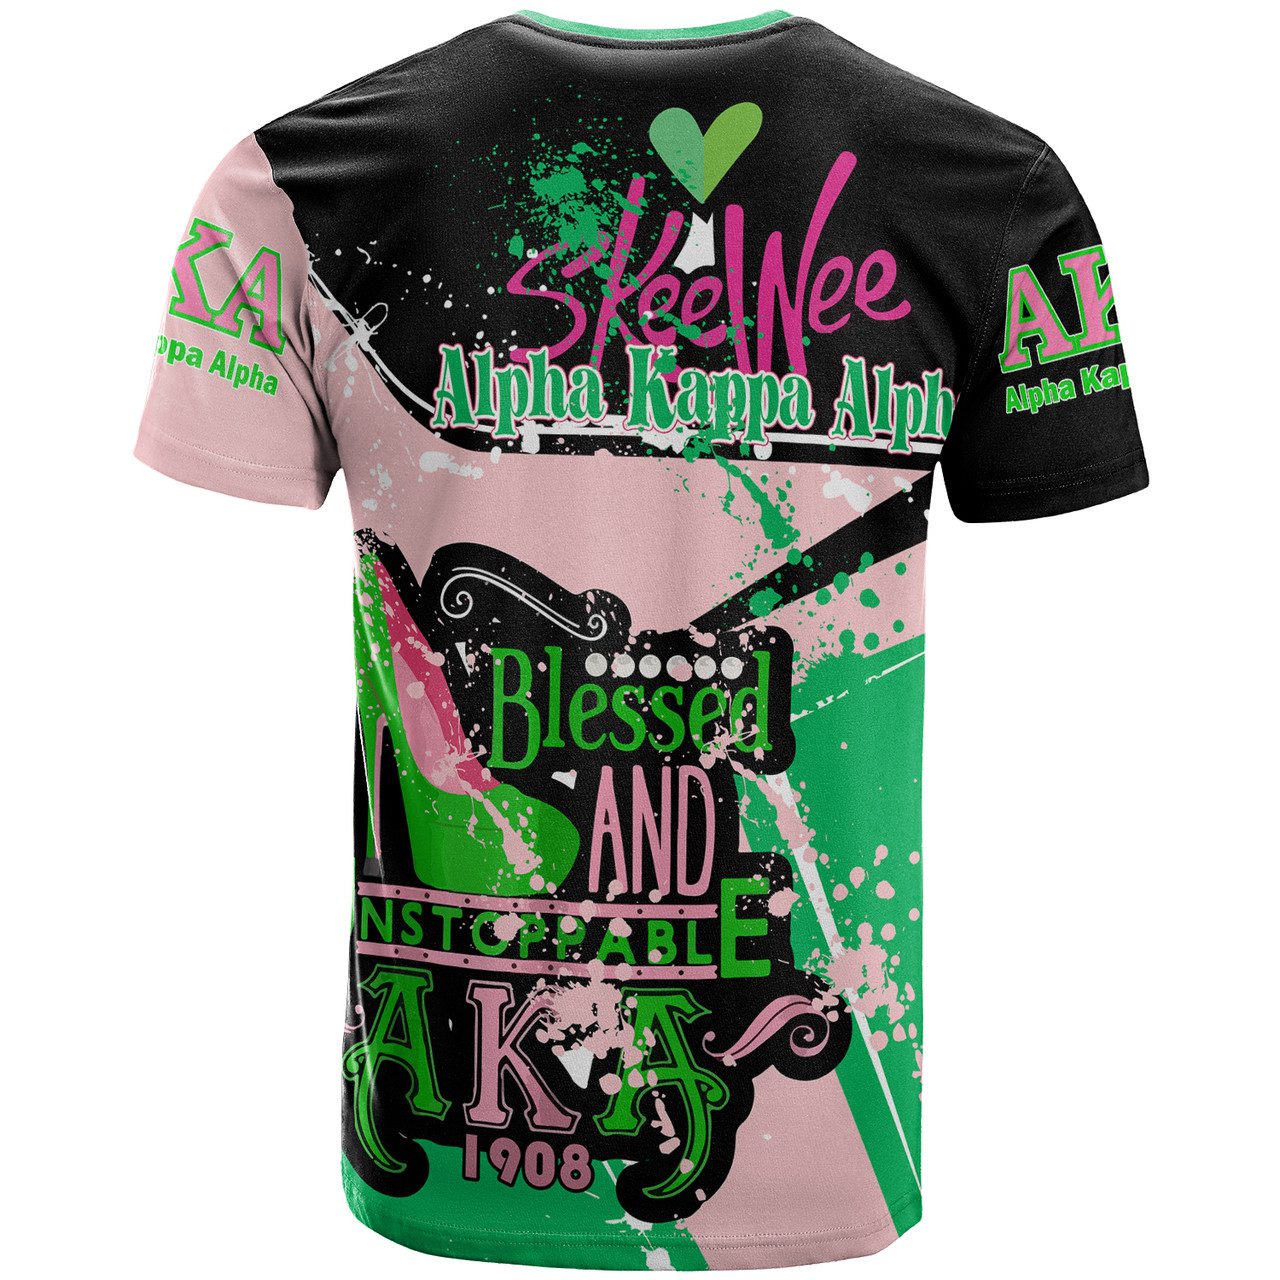 Alpha Kappa Alpha T-Shirt – Alpha Kappa Alpha Sorority Blessed And Unstoppable 1908 Splash Style T-shirt